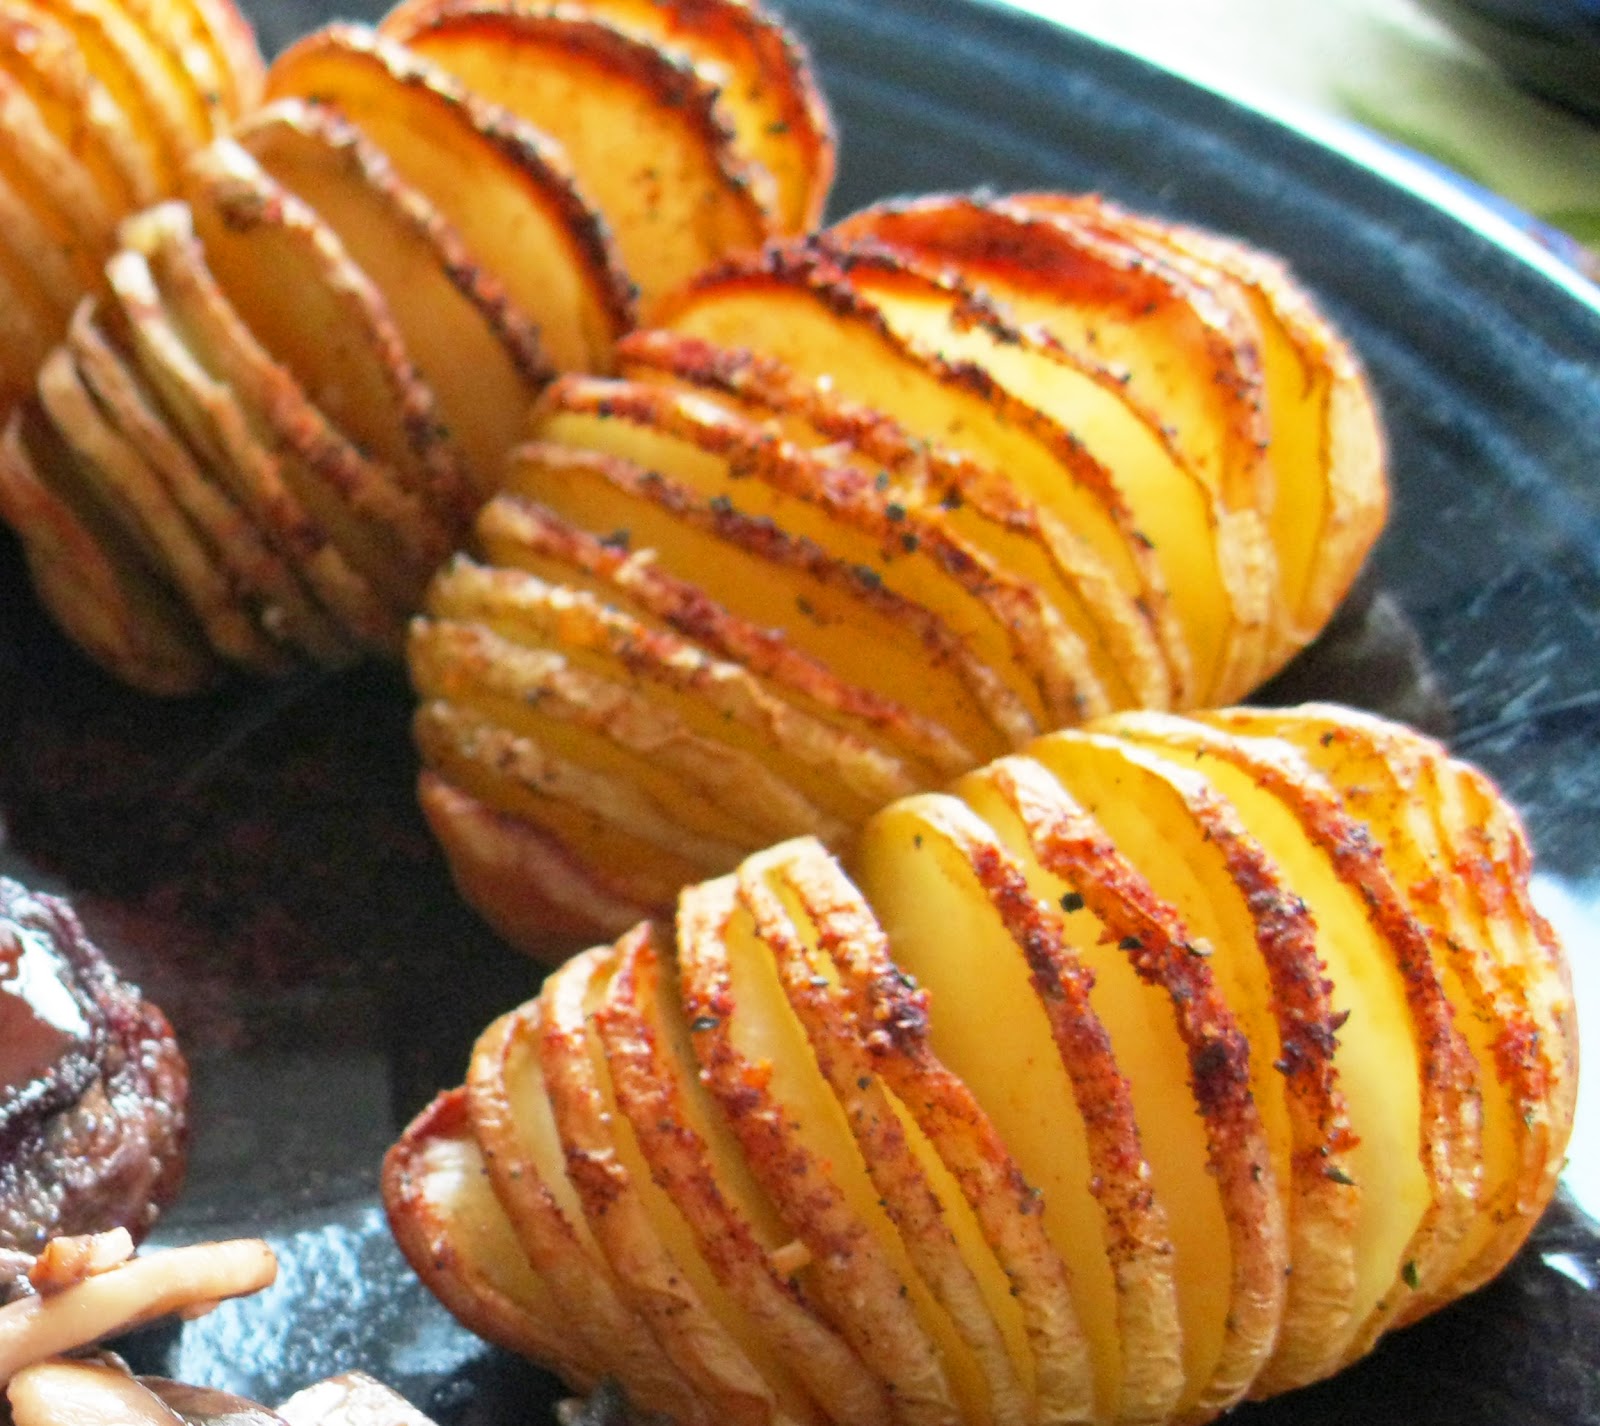 Healthy You: Sliced Baked Potatoes